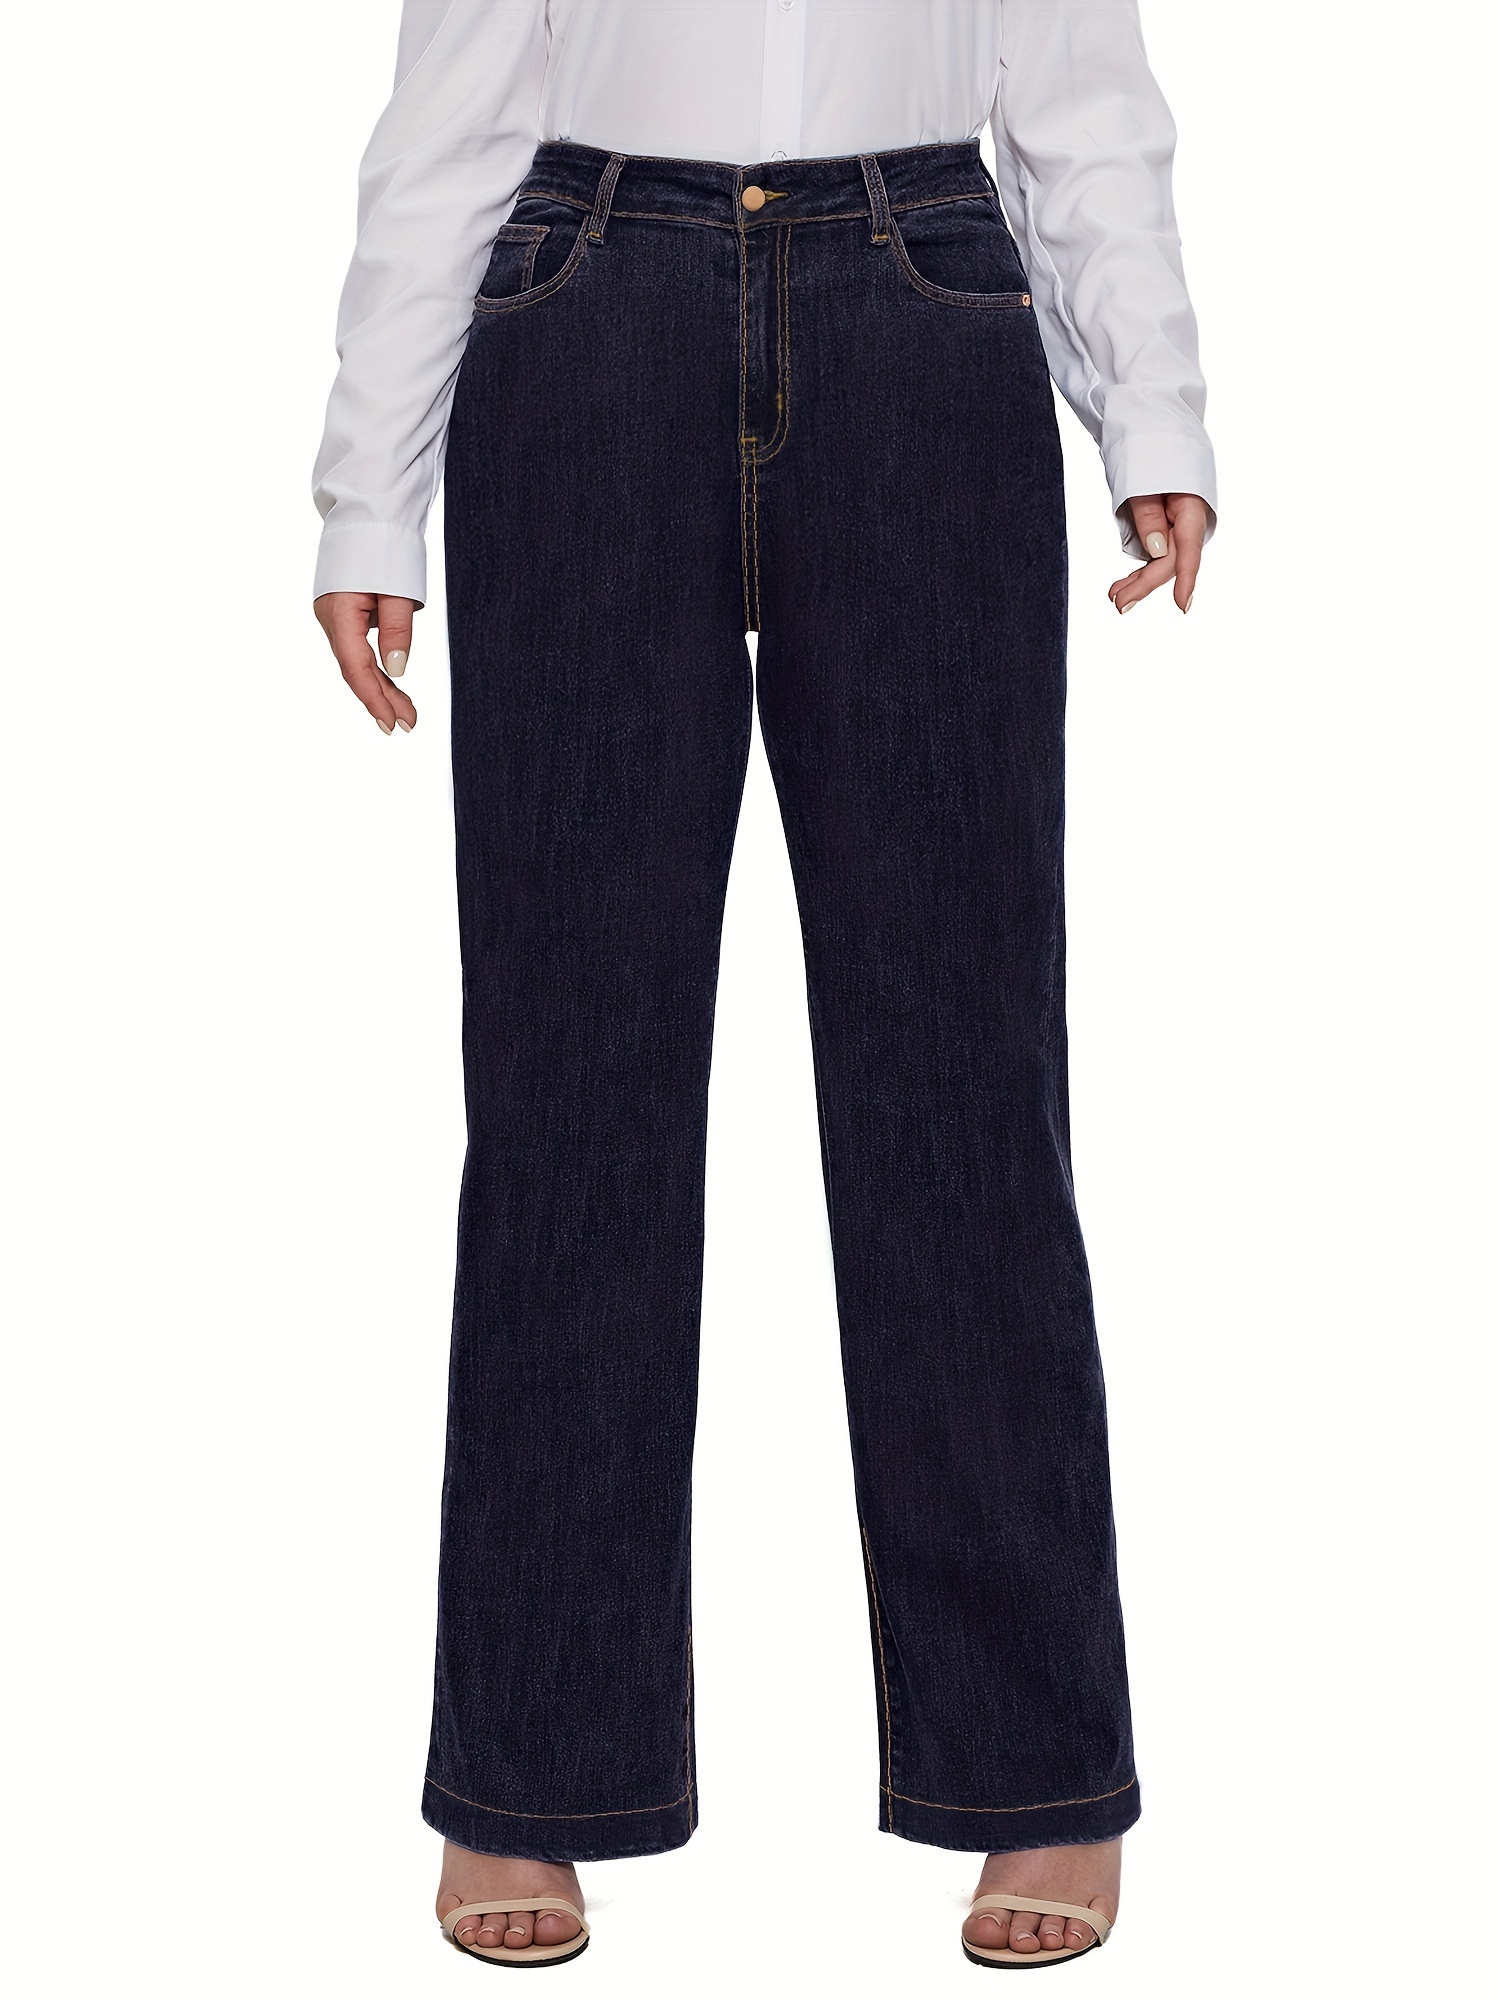 Plus Size Solid Button Up Straight Leg Jeans, Women's Plus Medium Stretch  Straight Leg Jeans